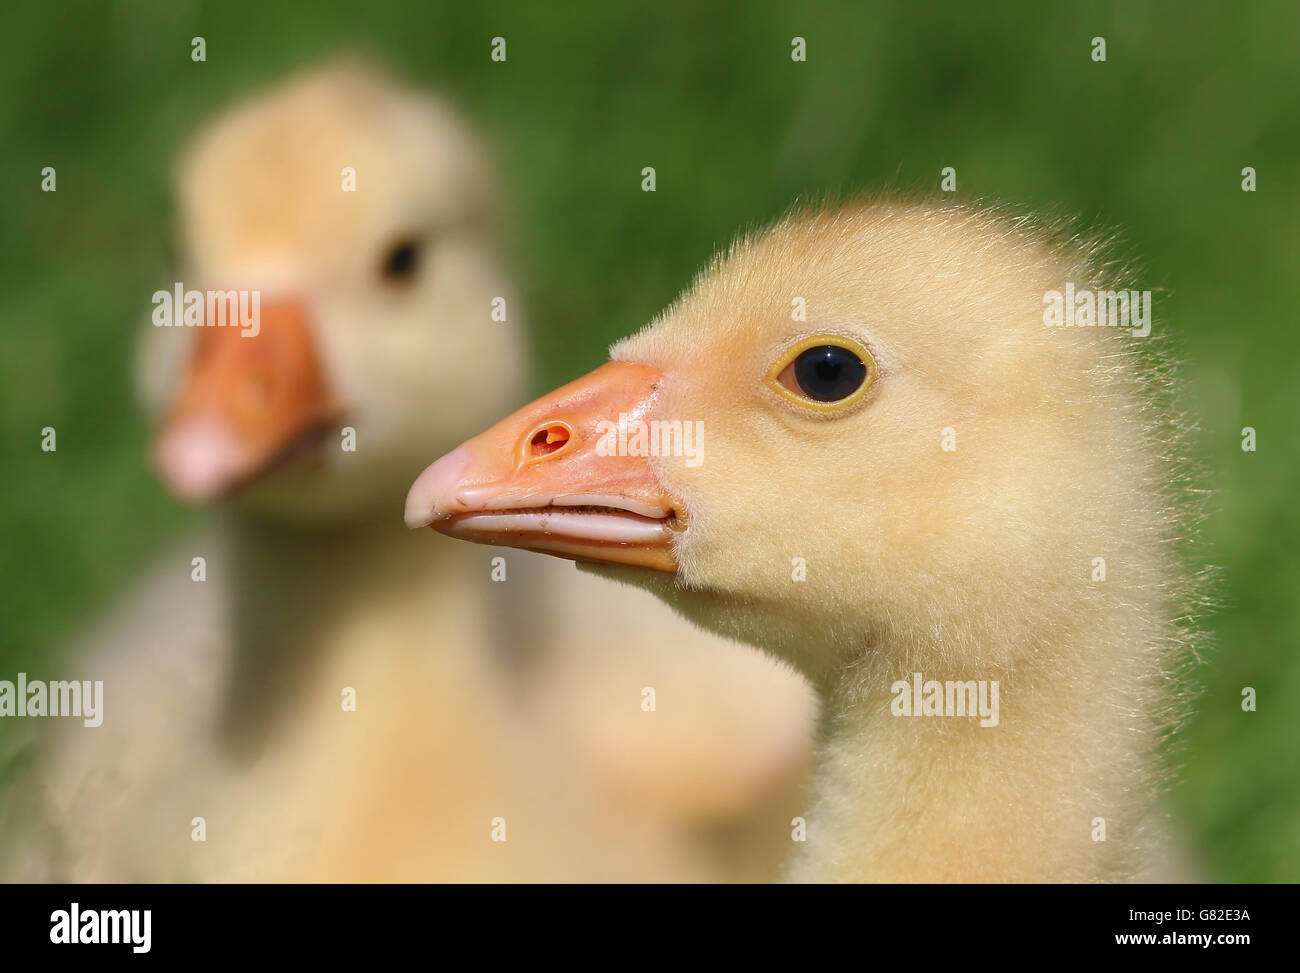 Duo portrait of two  fluffy goslings (Anser anser domesticus) in close-up Stock Photo